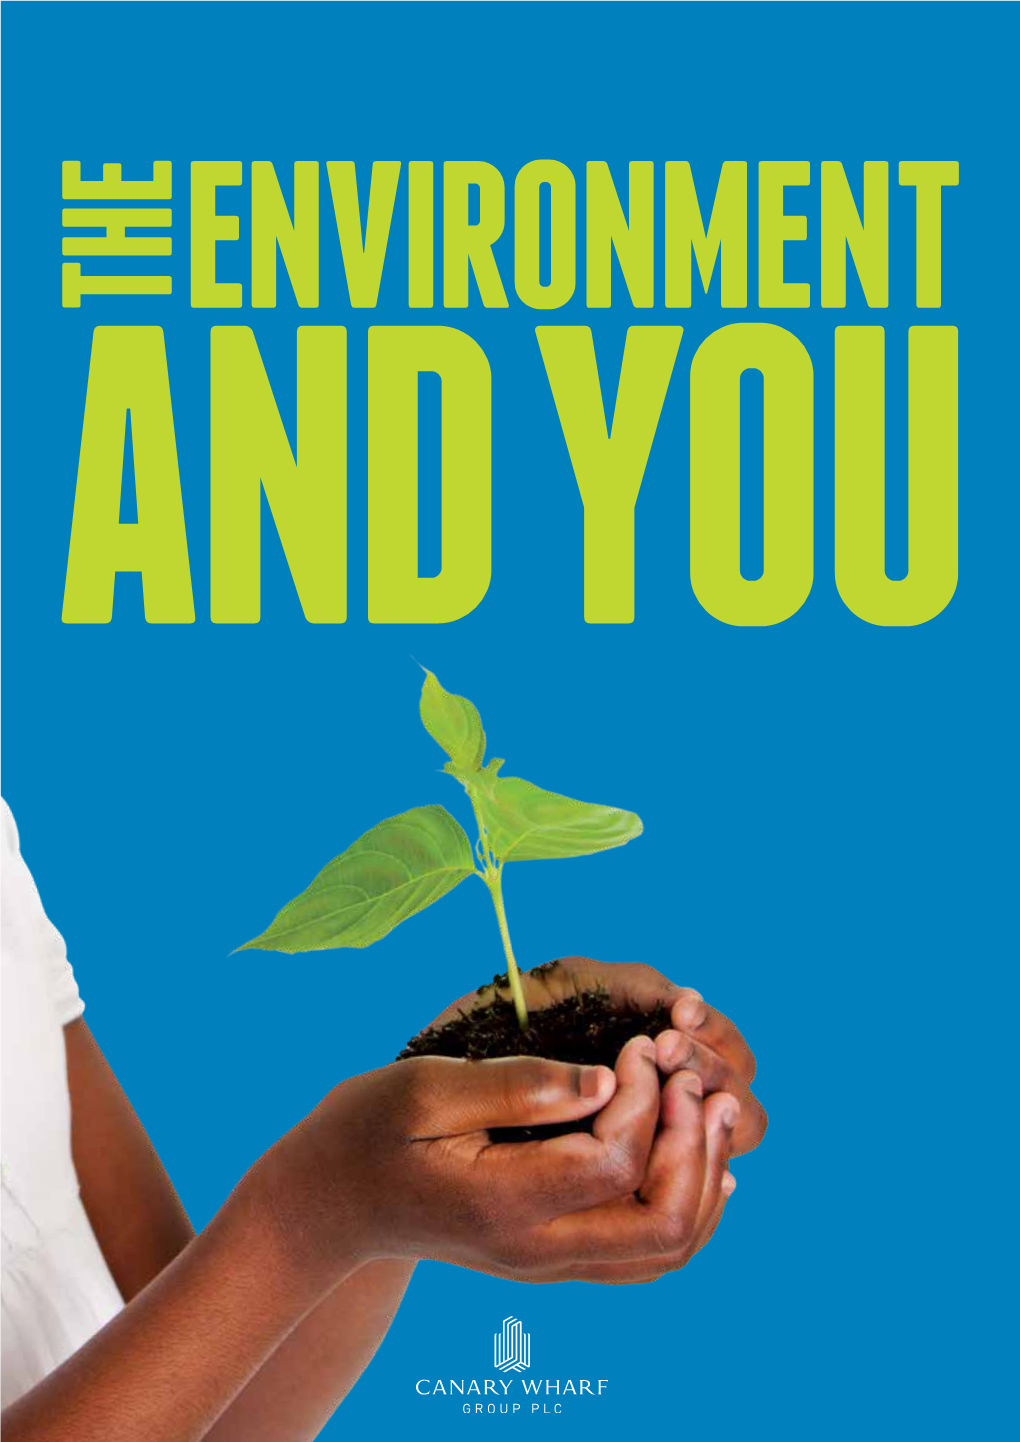 Download the Environment and You Information Booklet